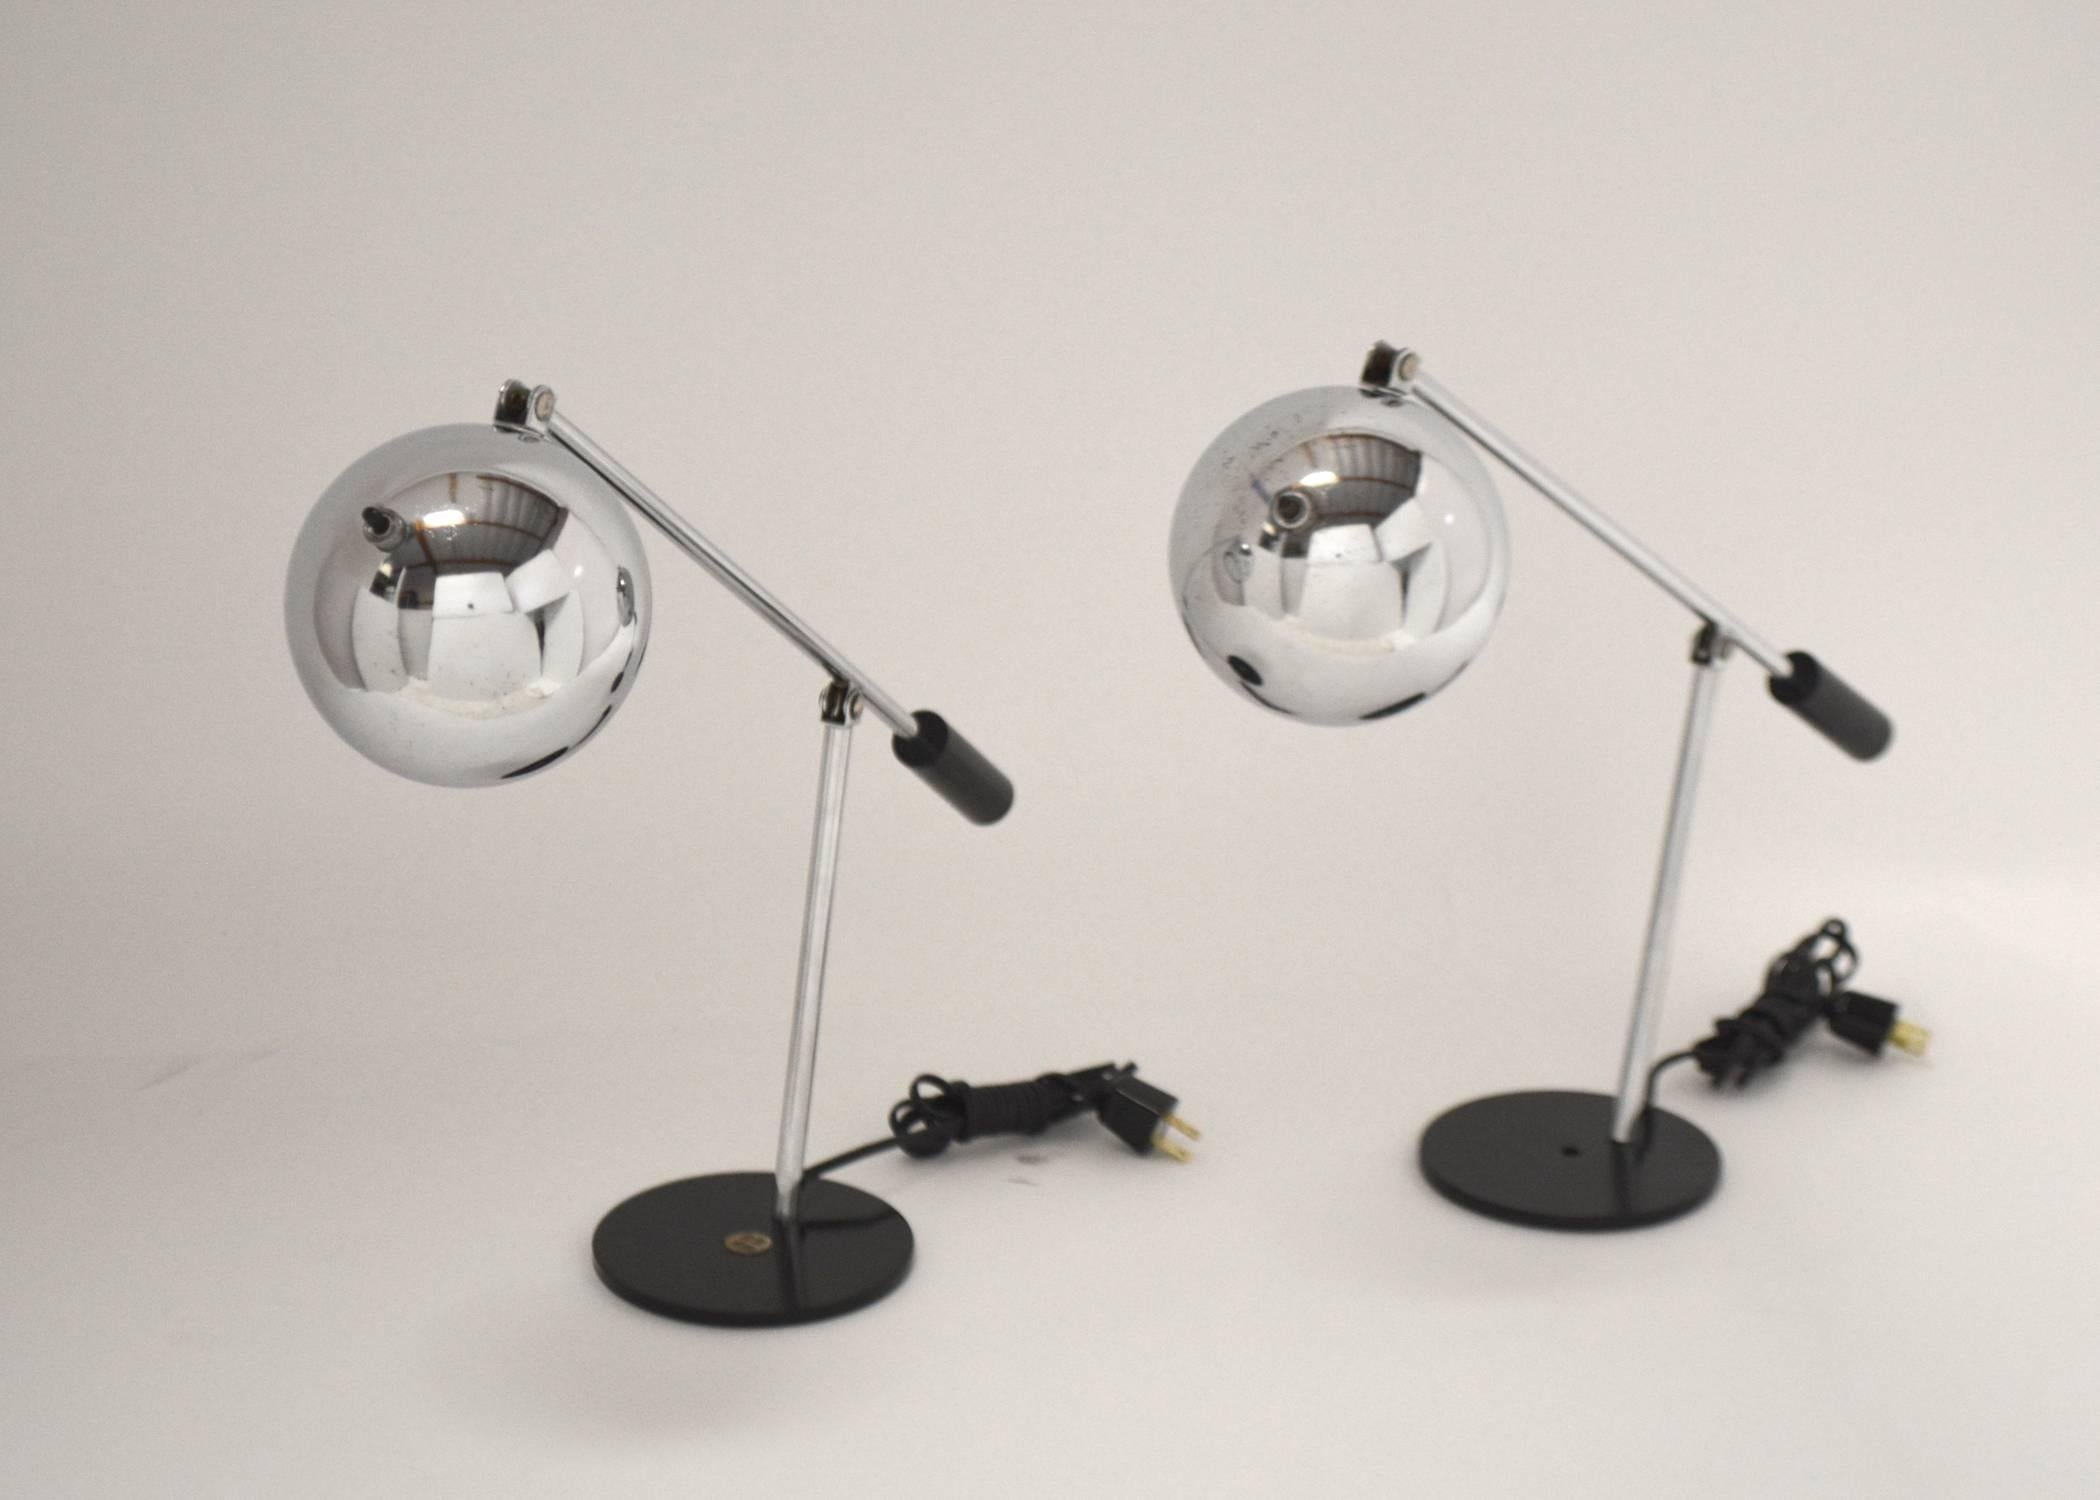 Pair of rare articulating lamps manufactured by Tensor. Chrome with black painted base.